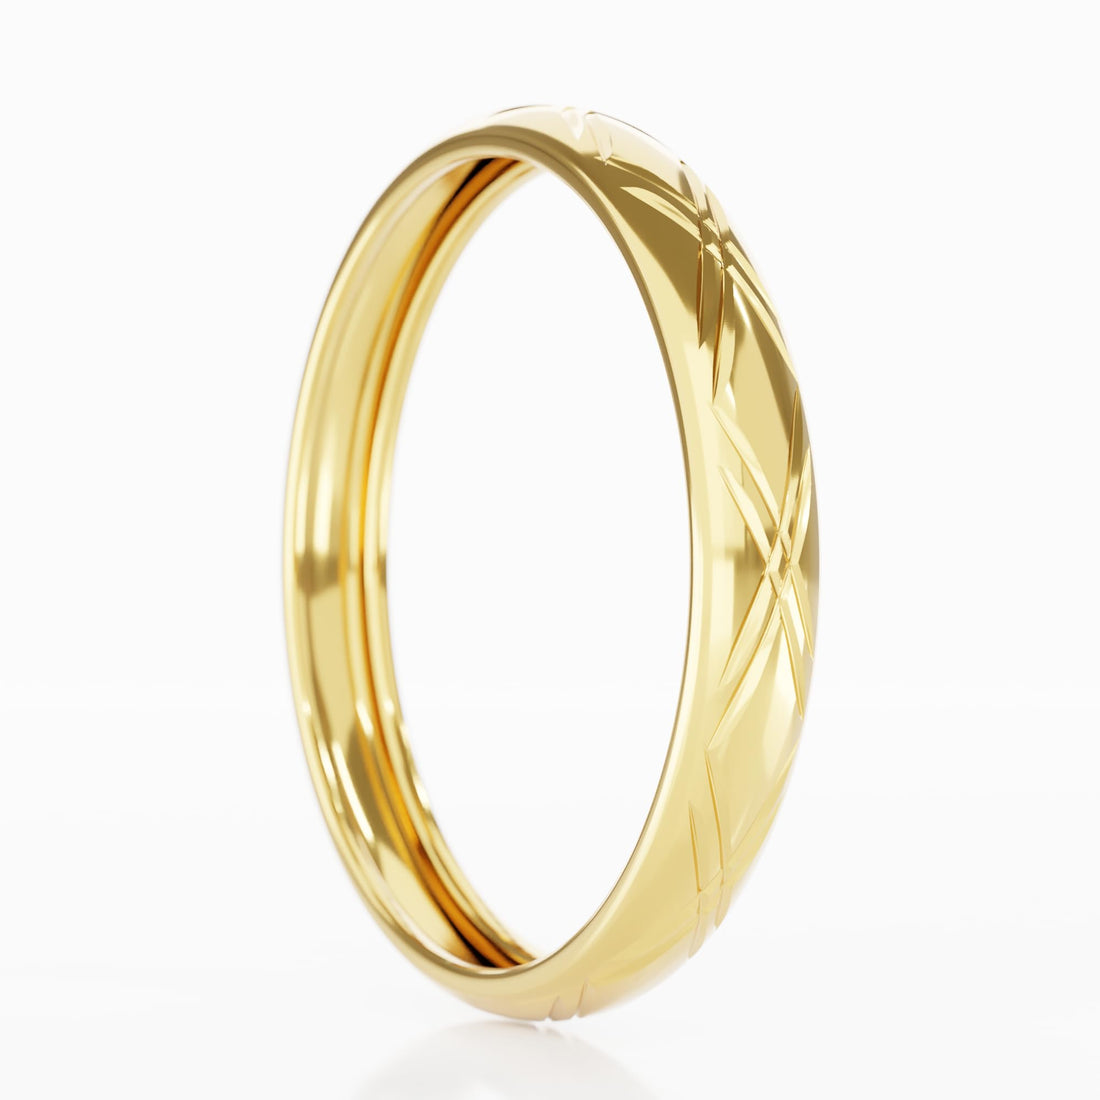 A Golden Guide: How to Care for Your Real Gold Jewelry